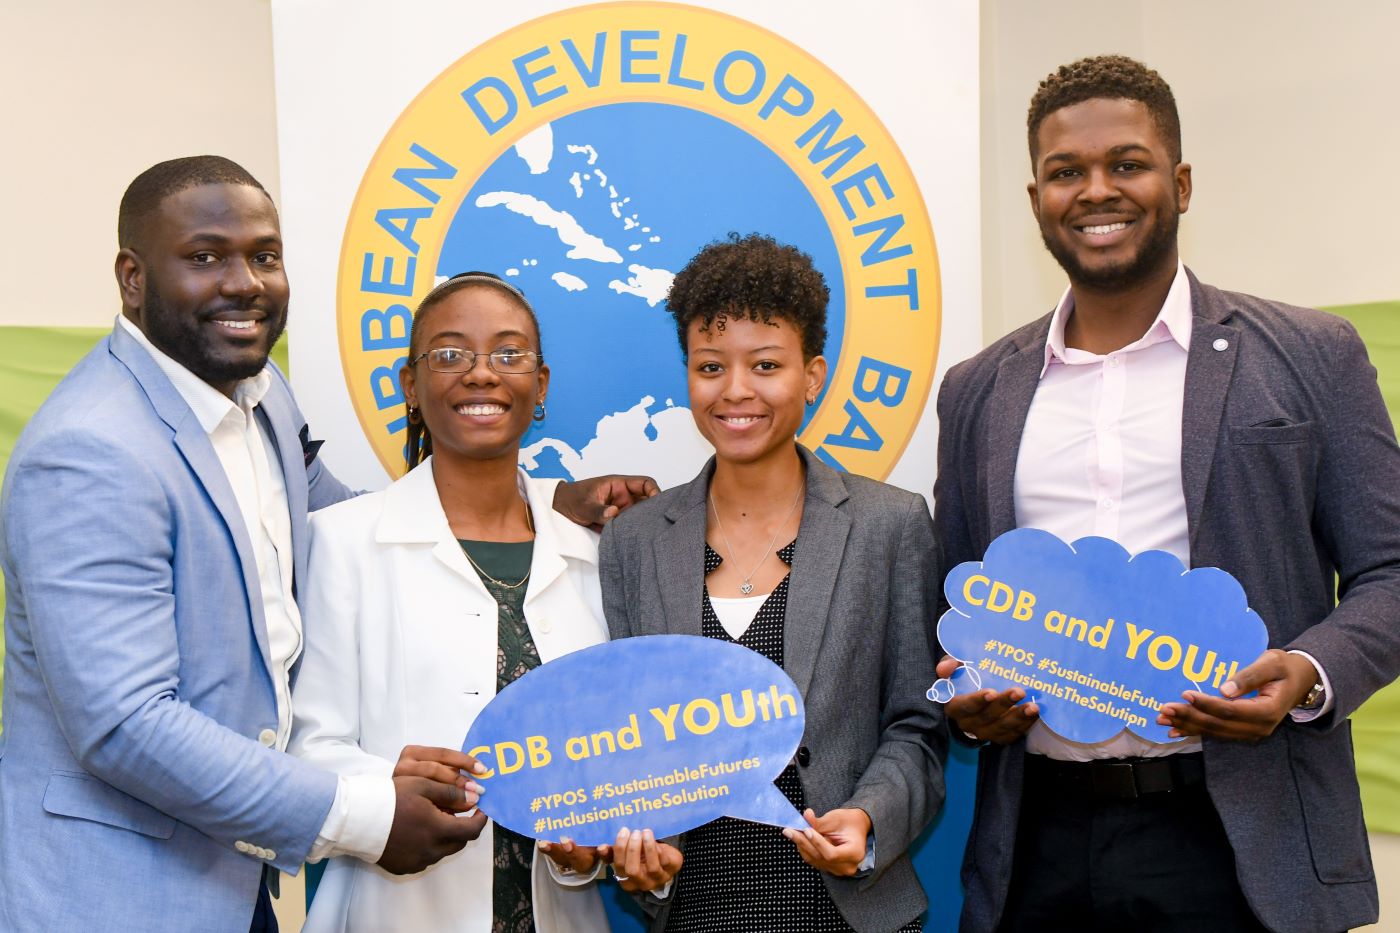 Four smiling young people holding youth-focused social media props